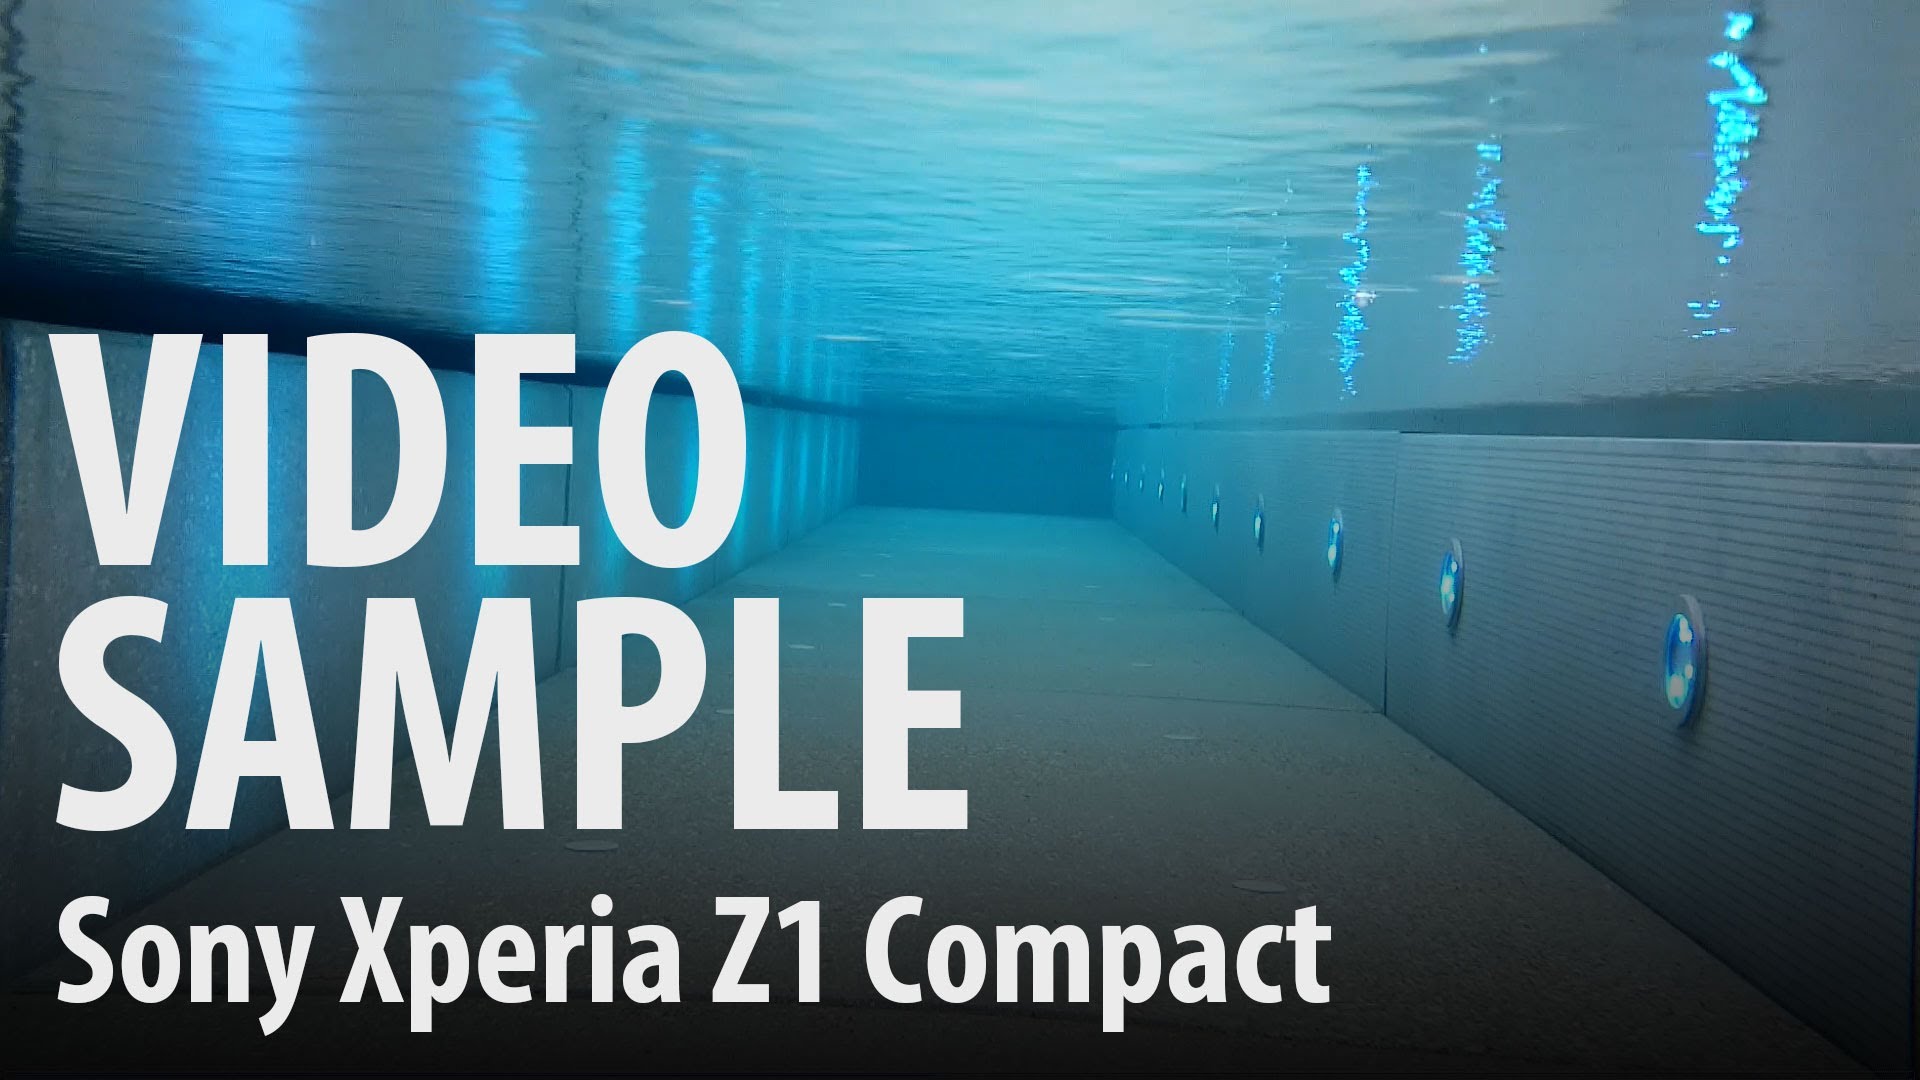 Sony Xperia Z1 Compact : underwater video sample